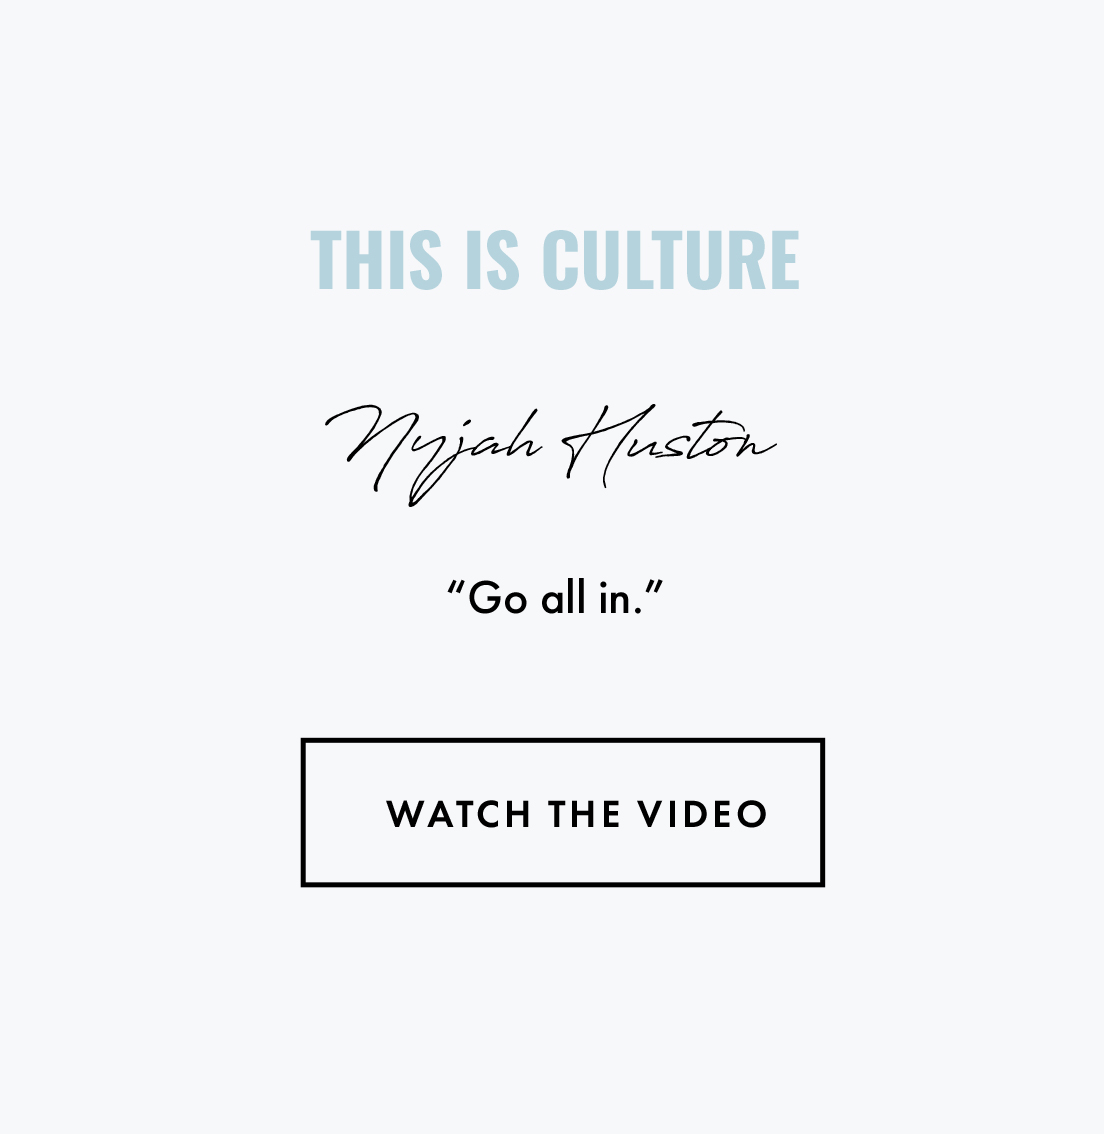 This is Culture Nyjah Huston. "Go all in." Watch the video